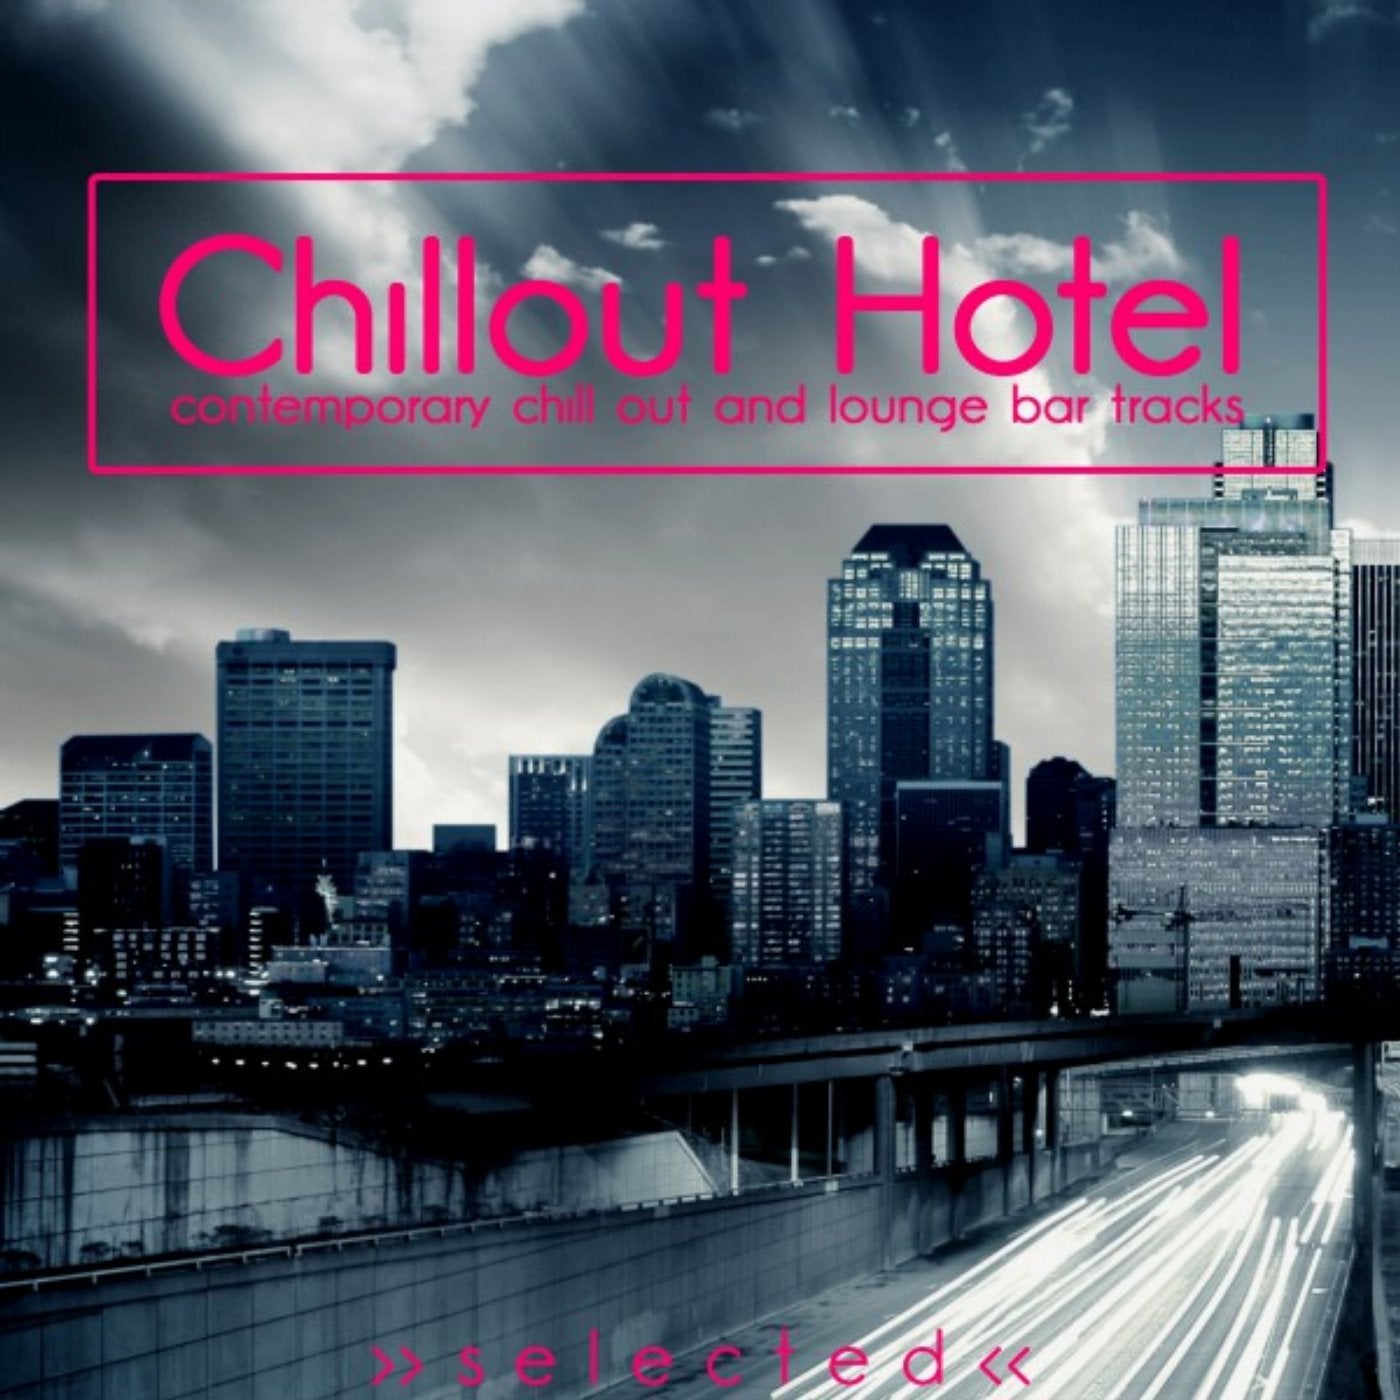 Chillout Hotel (Contemporary Chillout and Lounge Bar Tracks)